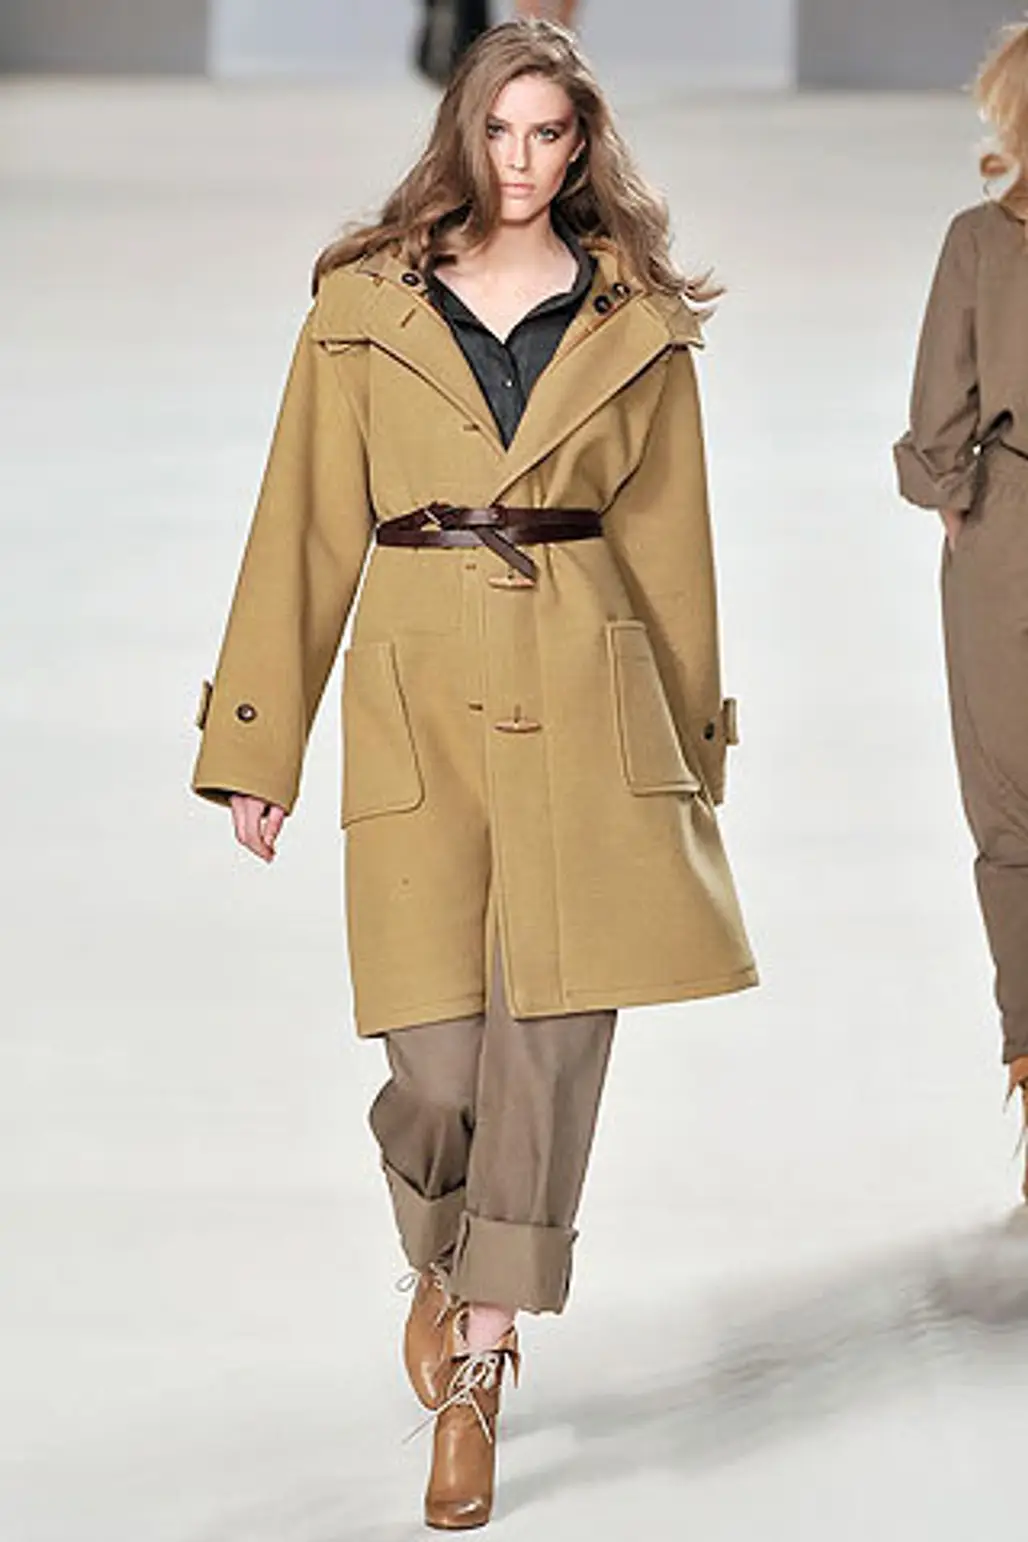 Brown Overcoat - Covering the Topic at Chloe